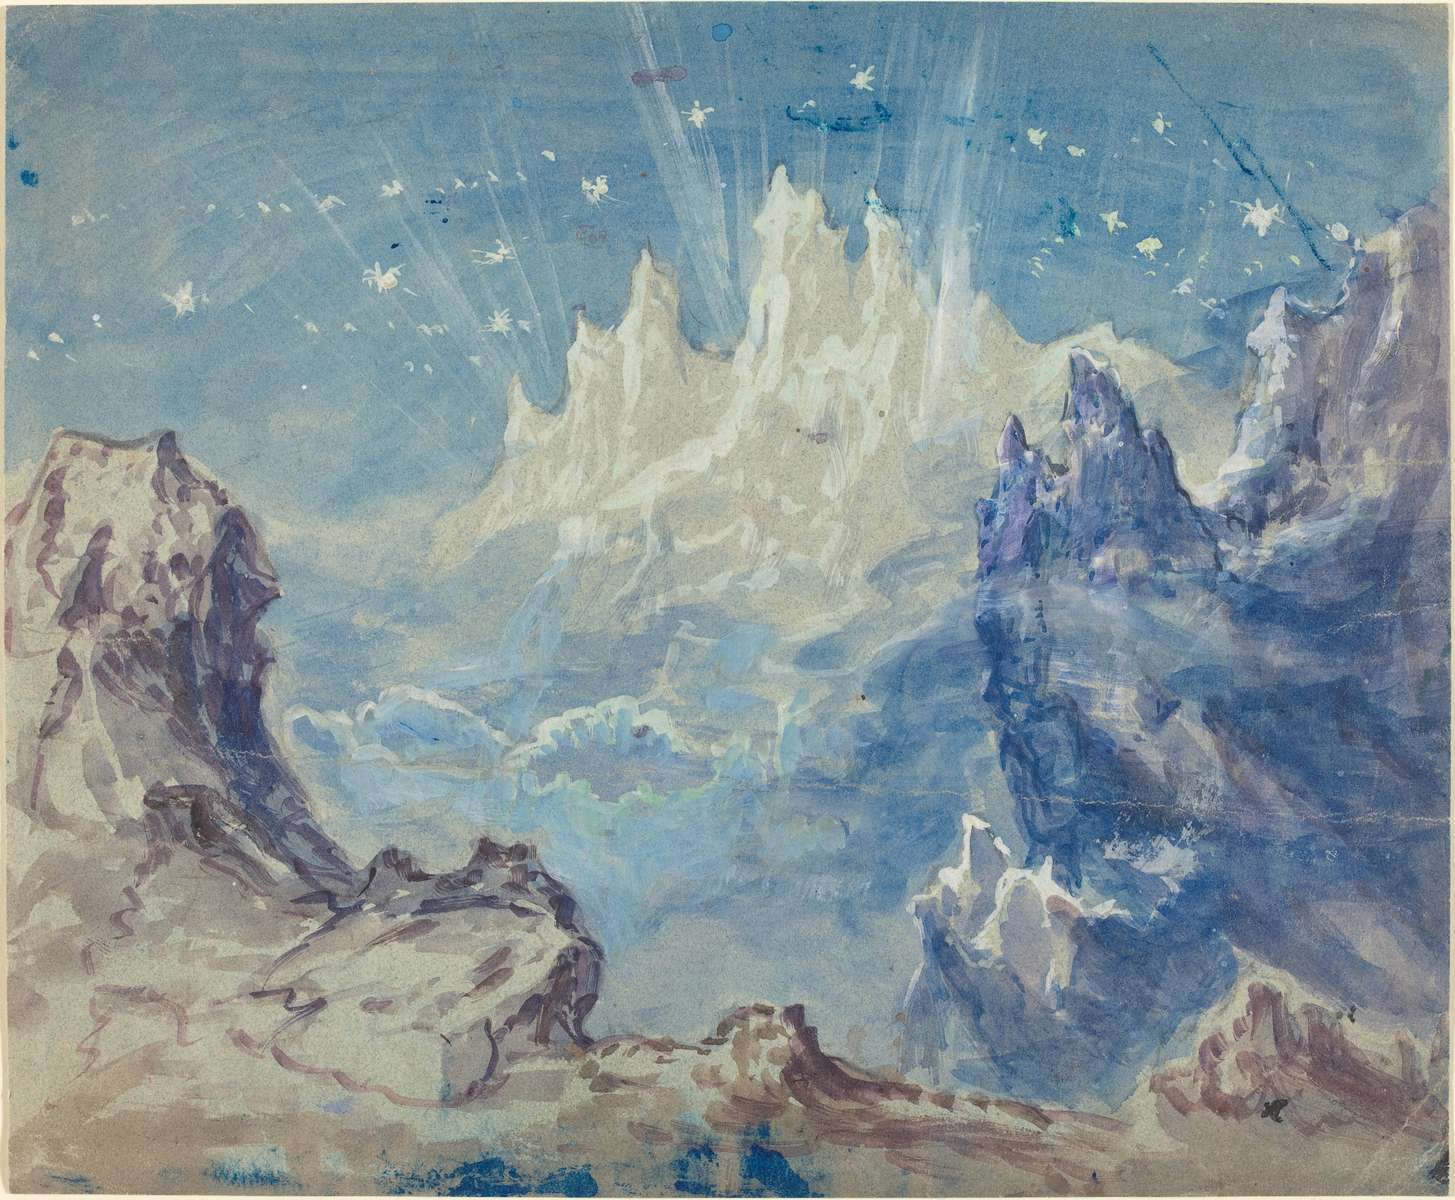 Robert Caney (British, 1847 - 1911 ), Fantastic Mountainous Landscape with a Starry Sky, , watercolor and gouache with white heightening, touches of blue pastel, on wove paper, Joseph F. McCrindle Collection